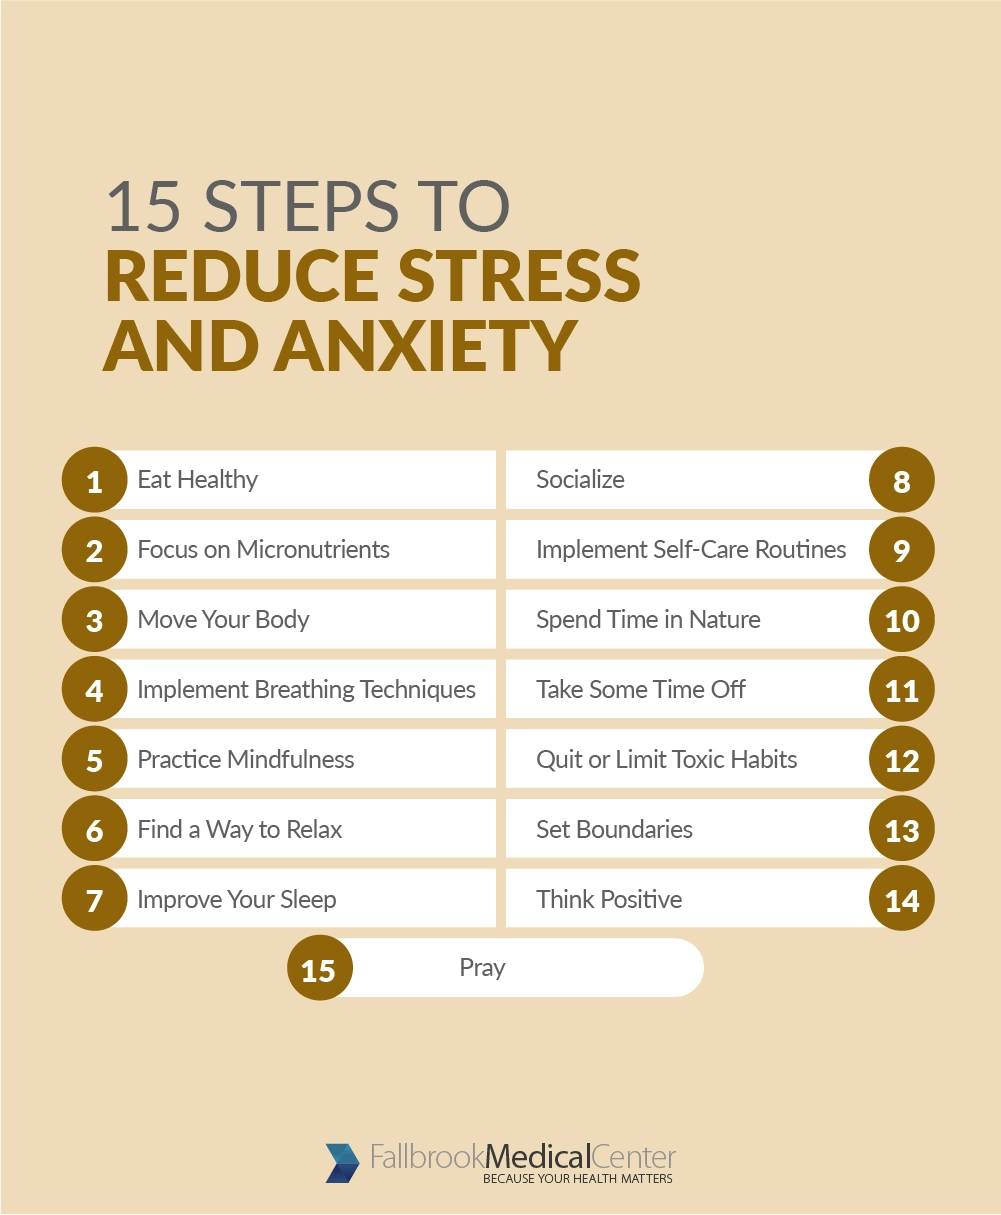 7 Simple Steps to Help With Anxiety